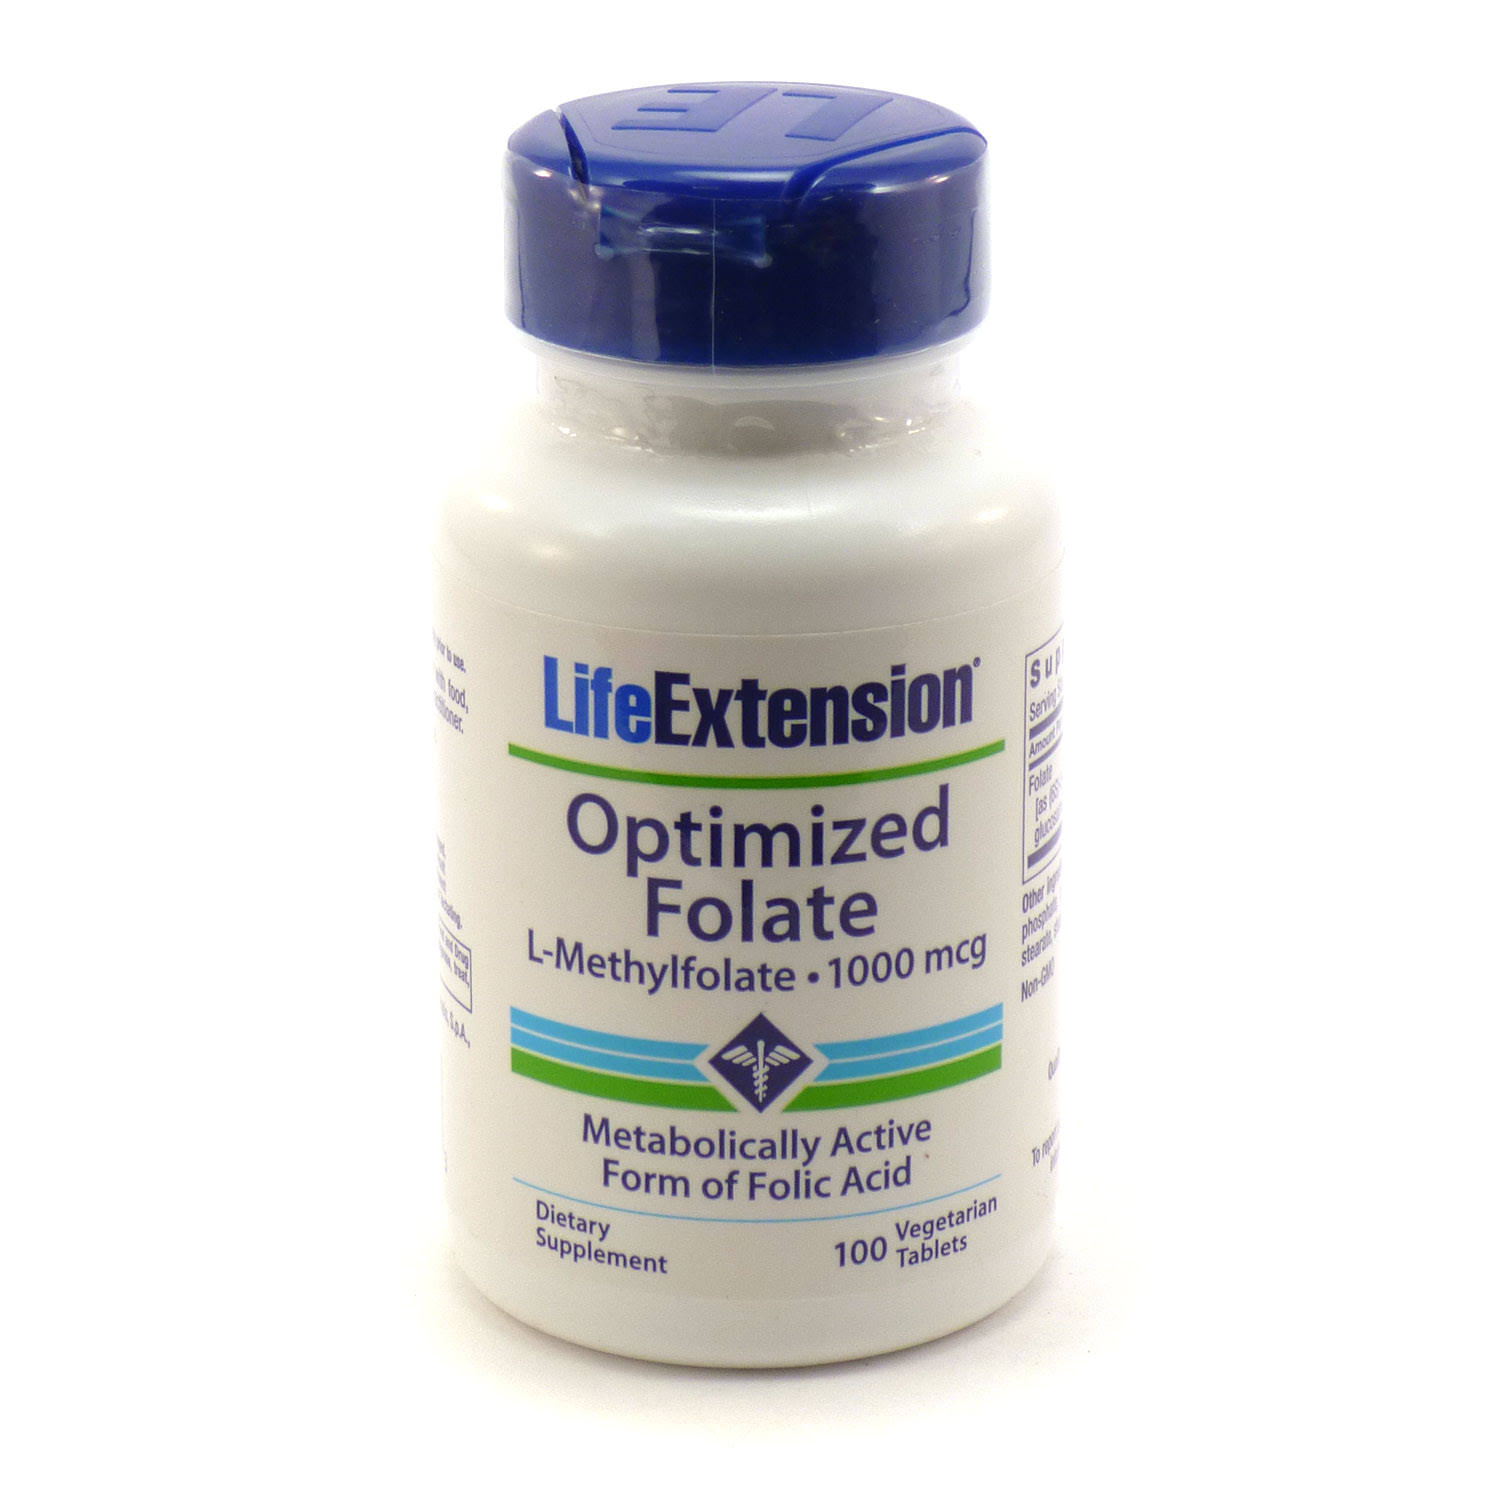 Life Extension Optimized Folate Supplement - 100 Vegetarian Tablets